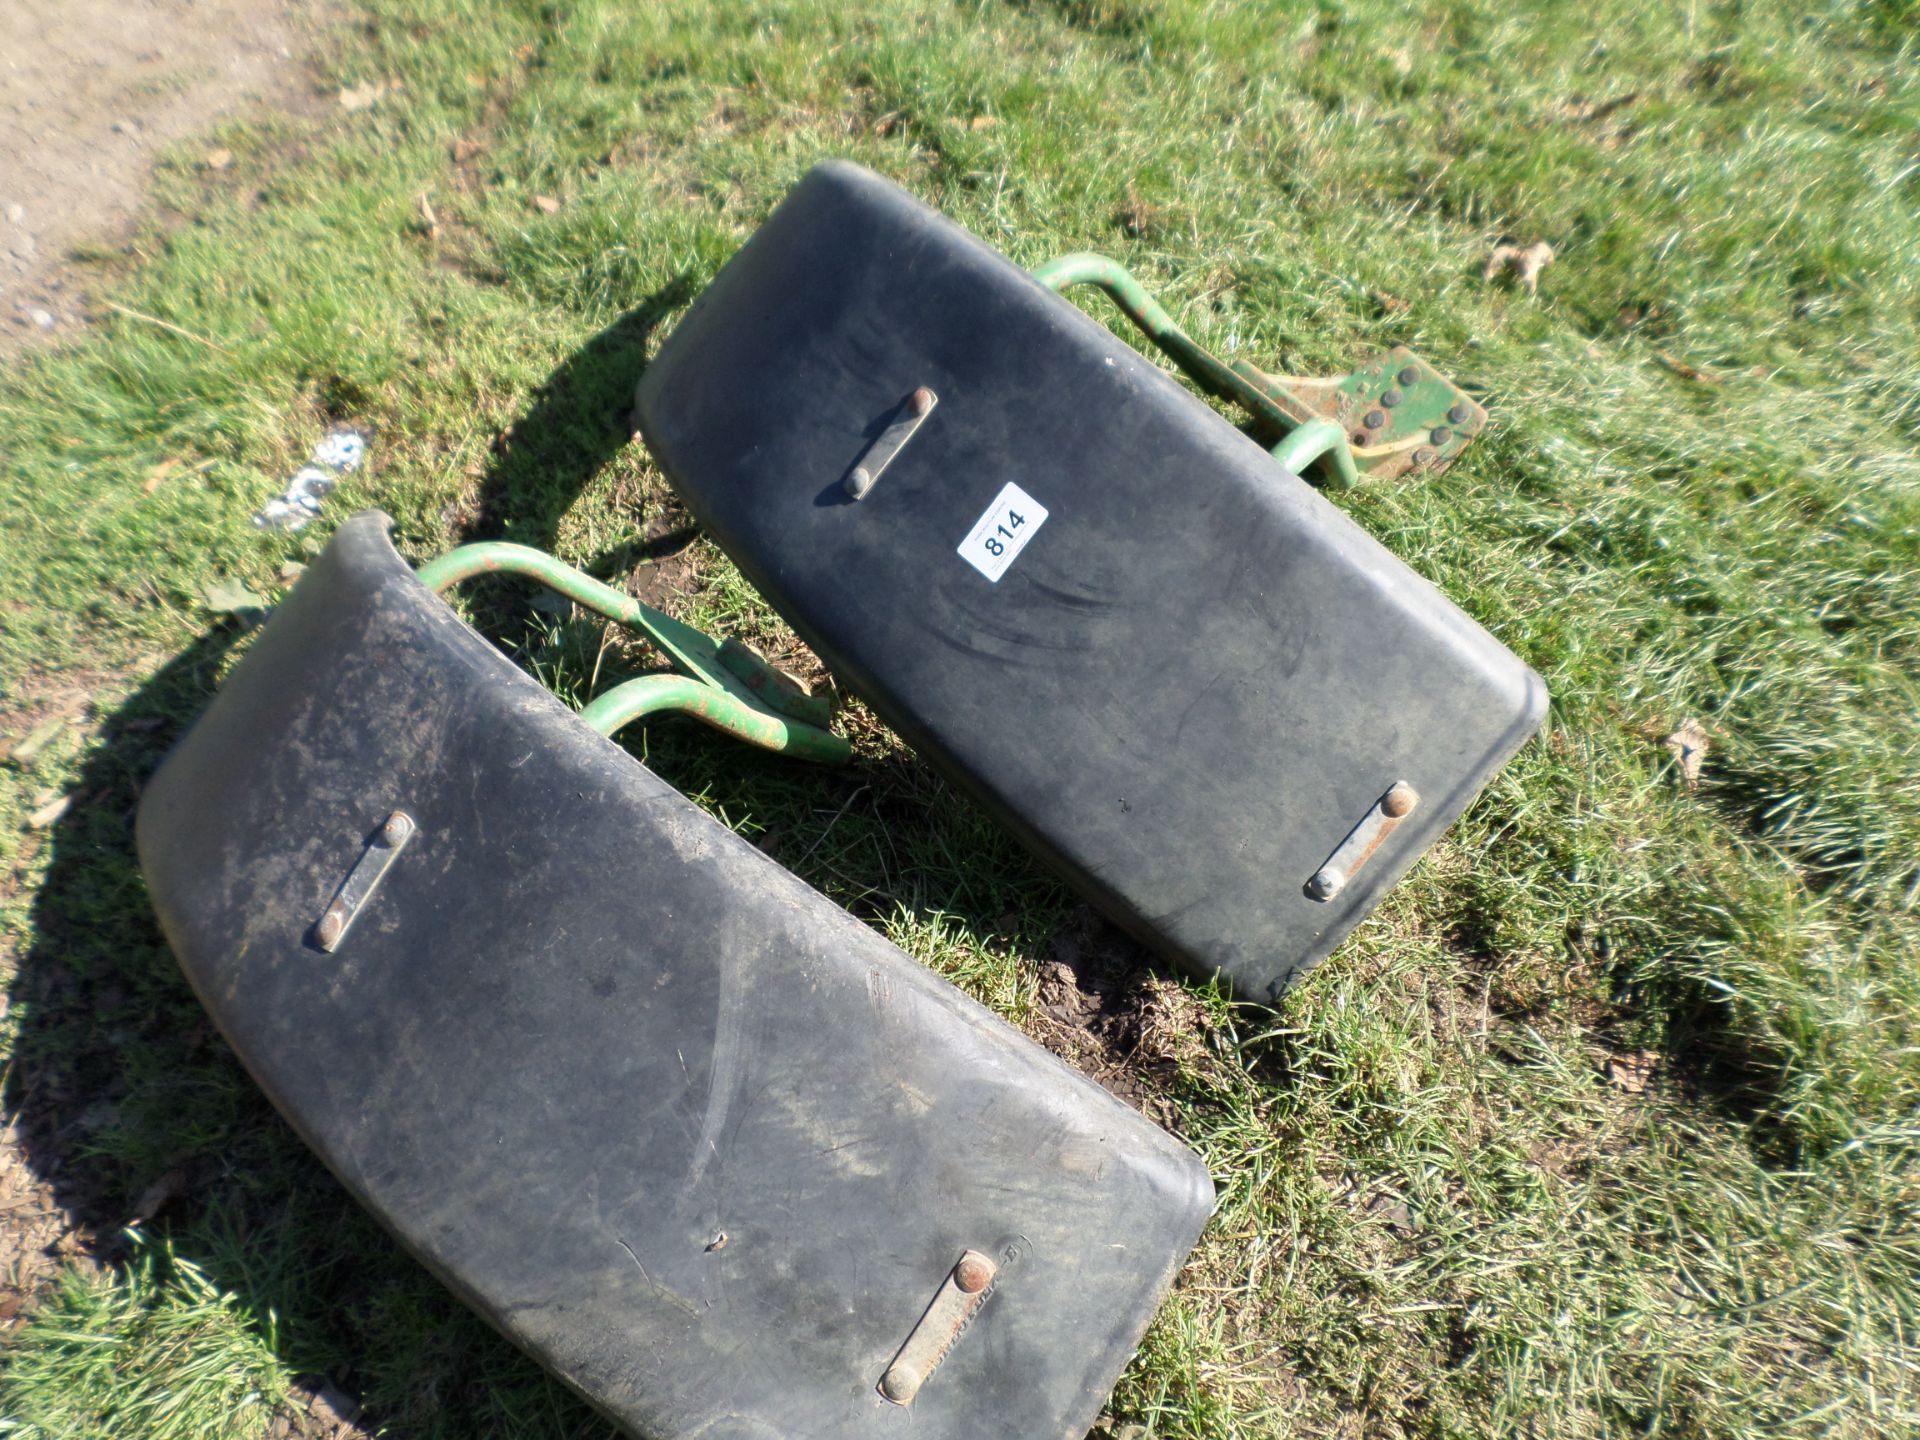 Pair of tractor front mudguards to fit John Deere 6200